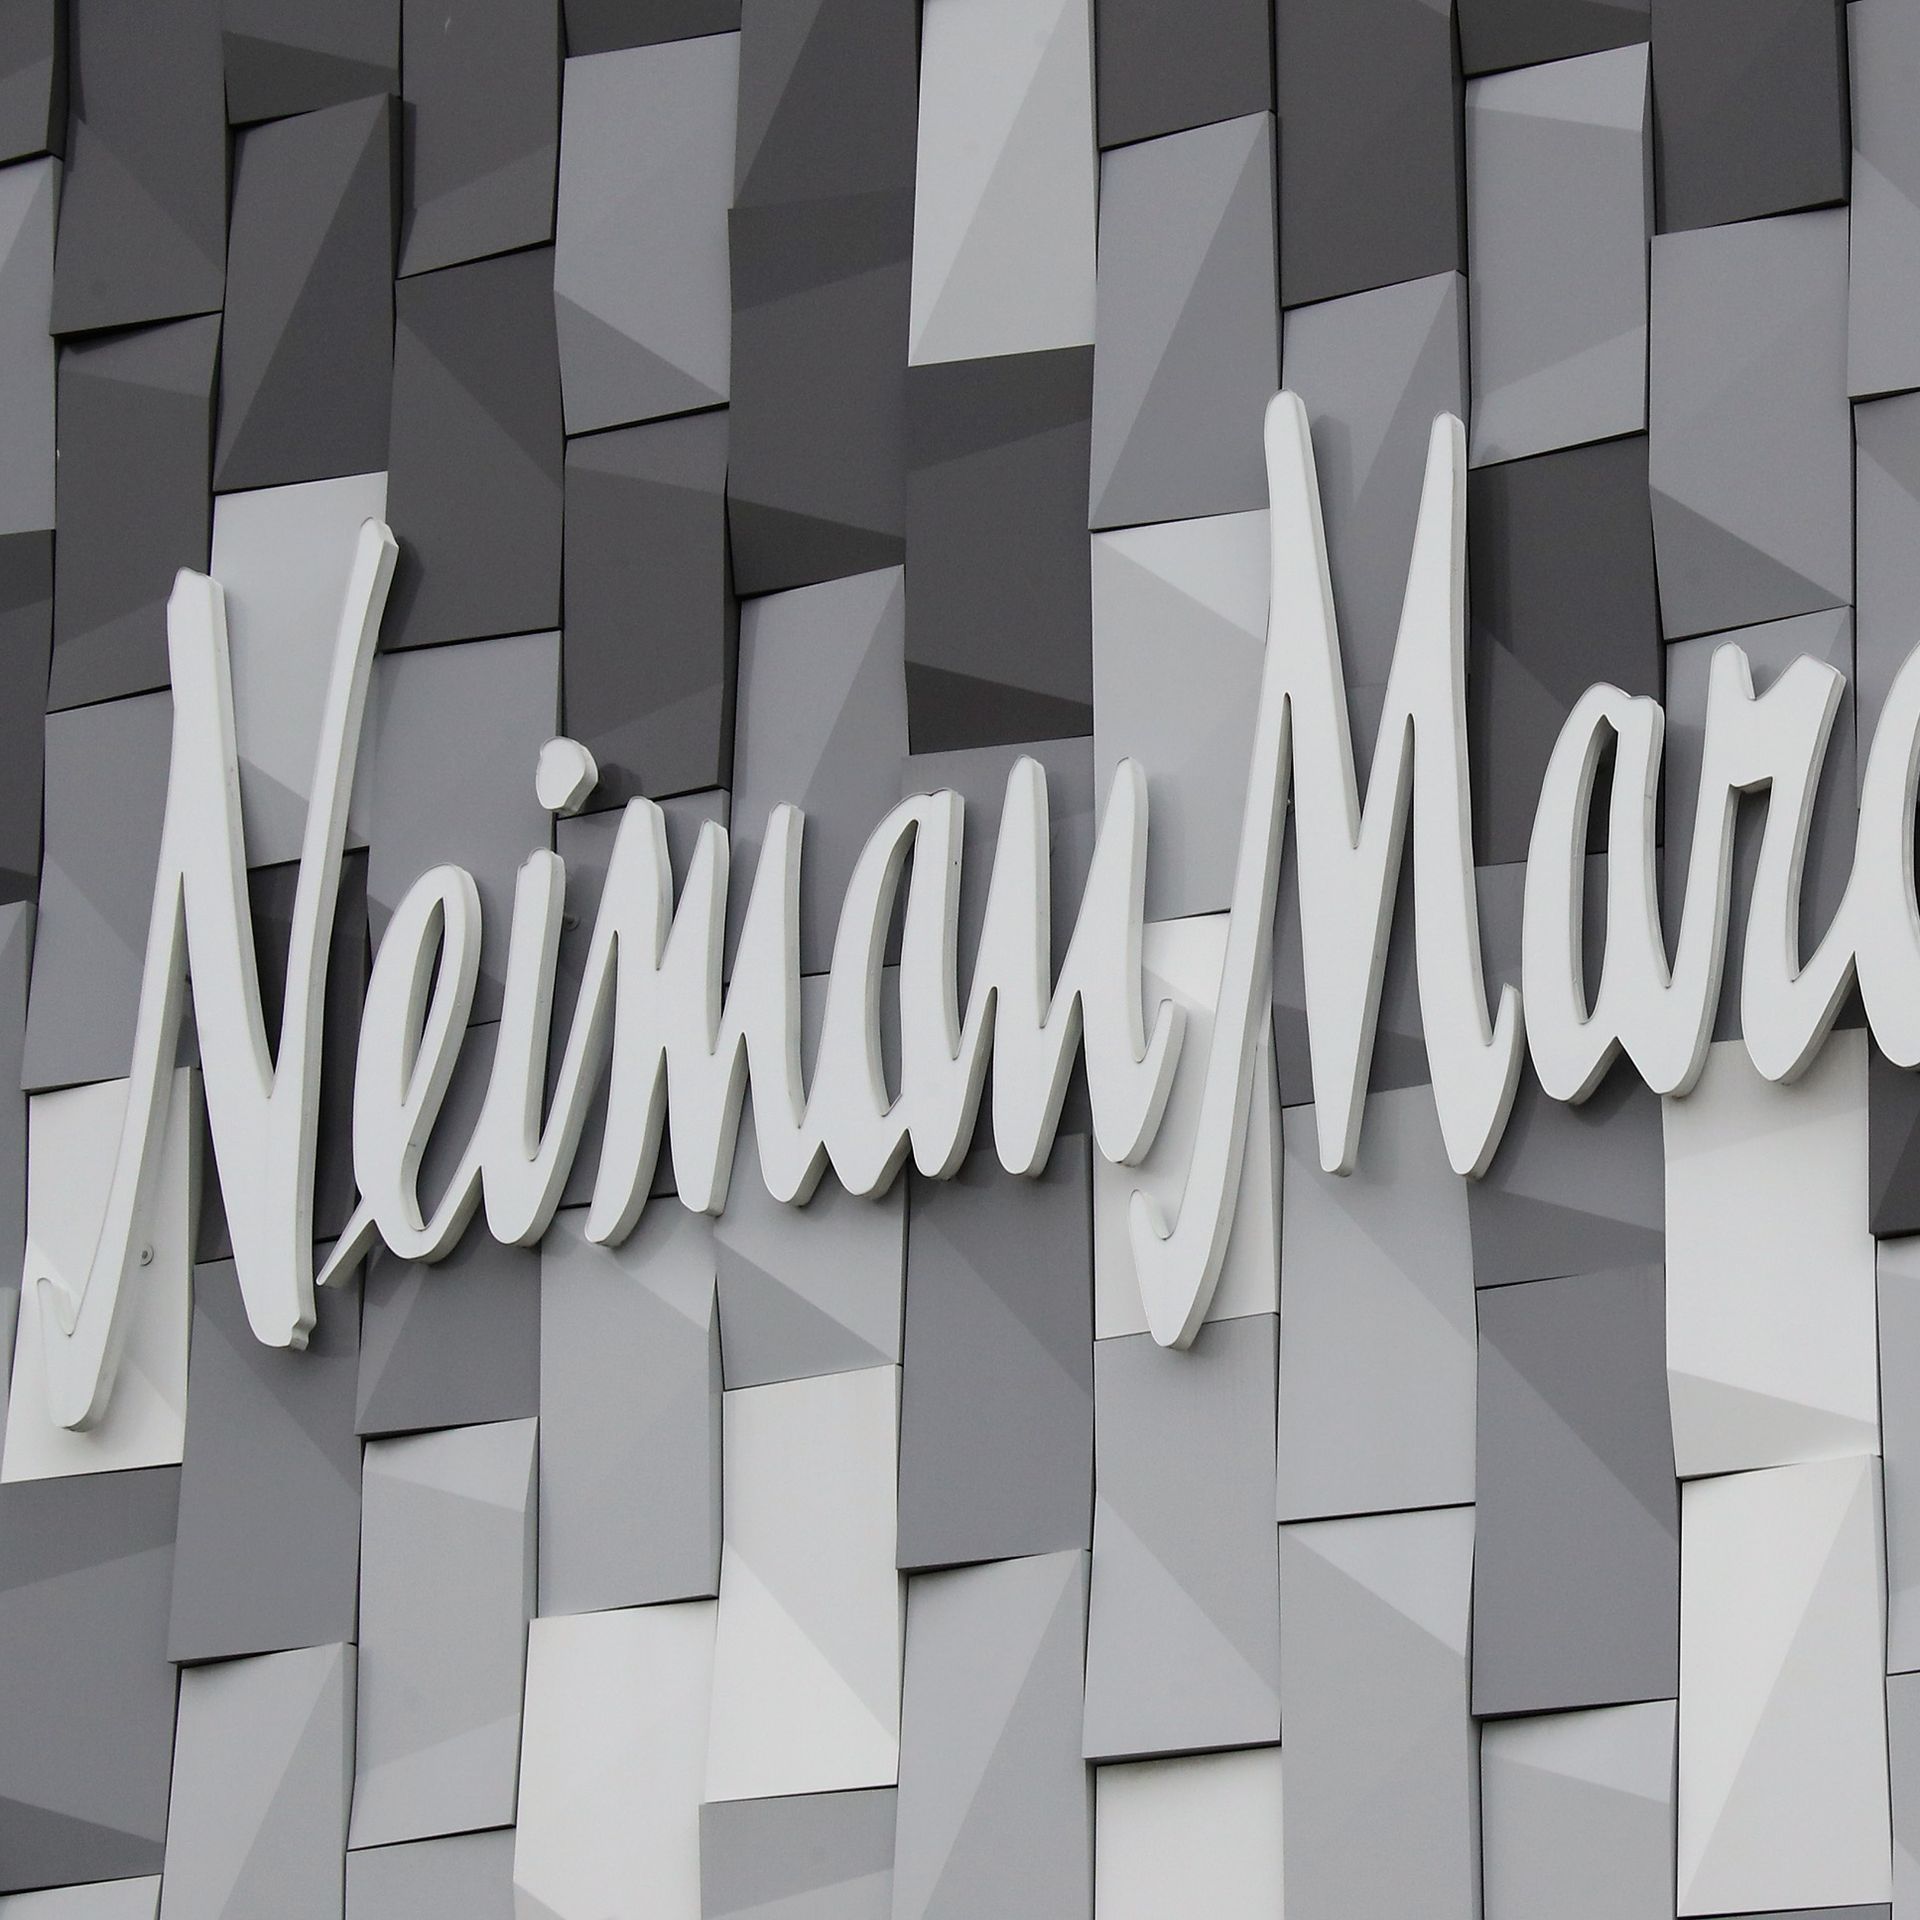 Neiman Marcus faces rift with big luxury labels including Gucci